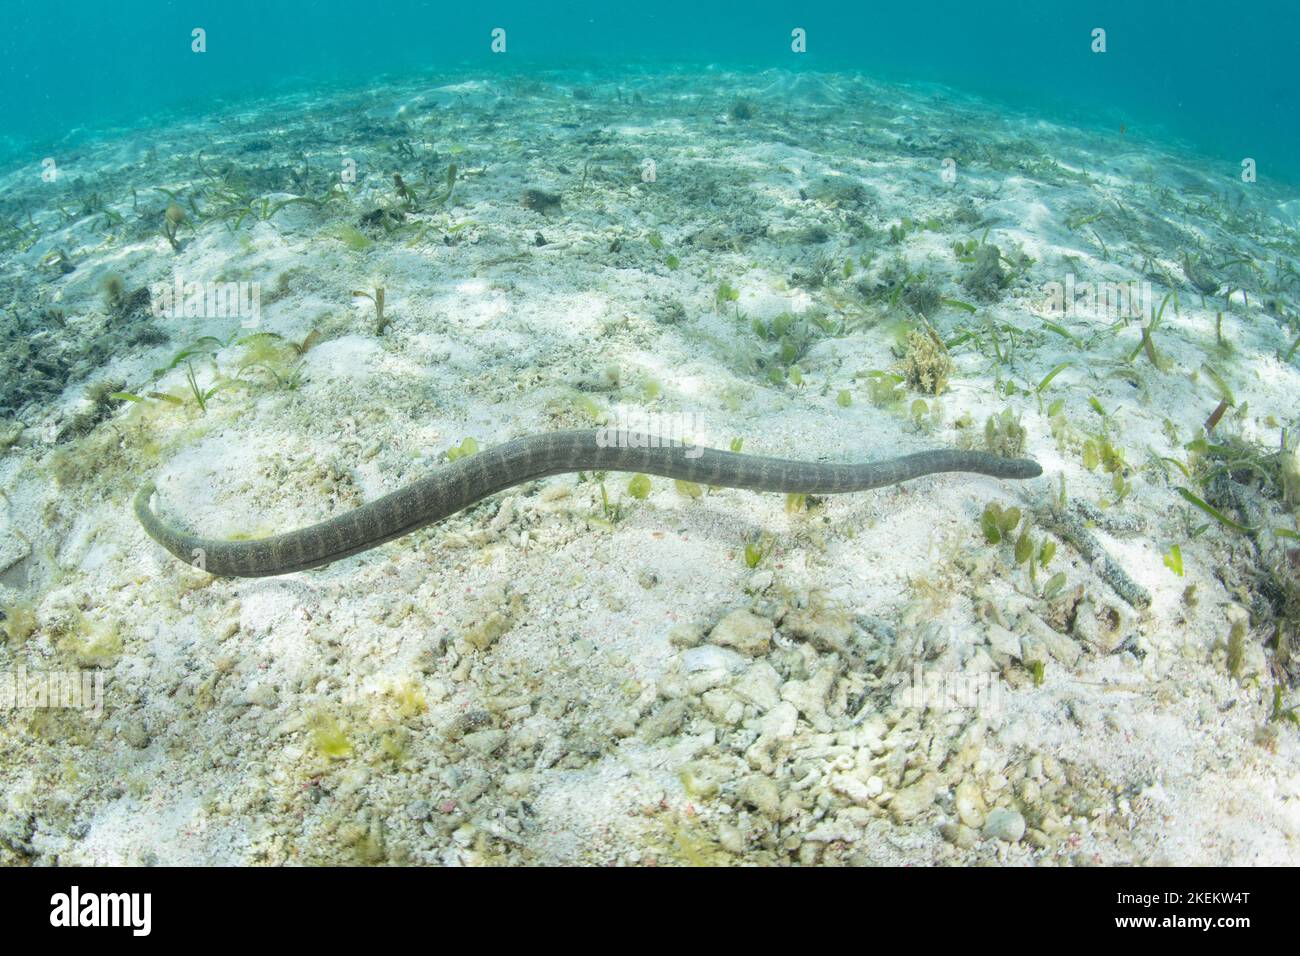 A Marine file snake, Acrochordus granulatus, hunts for small fish in a shallow seagrass meadow in Komodo National Park, Indonesia. Stock Photo